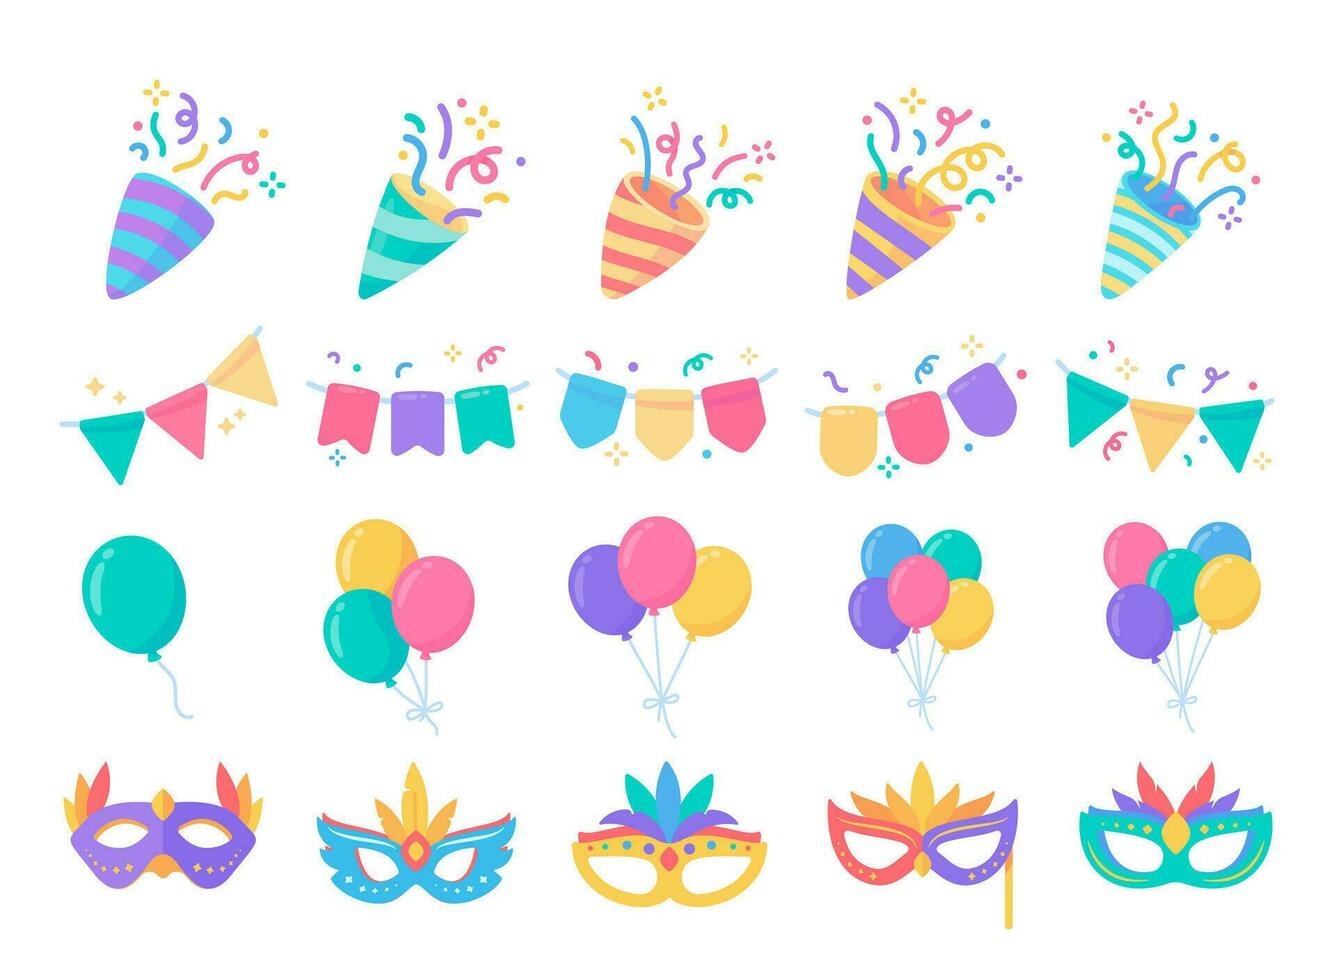 Elements in a birthday party. A fun party for children on the festival day. vector